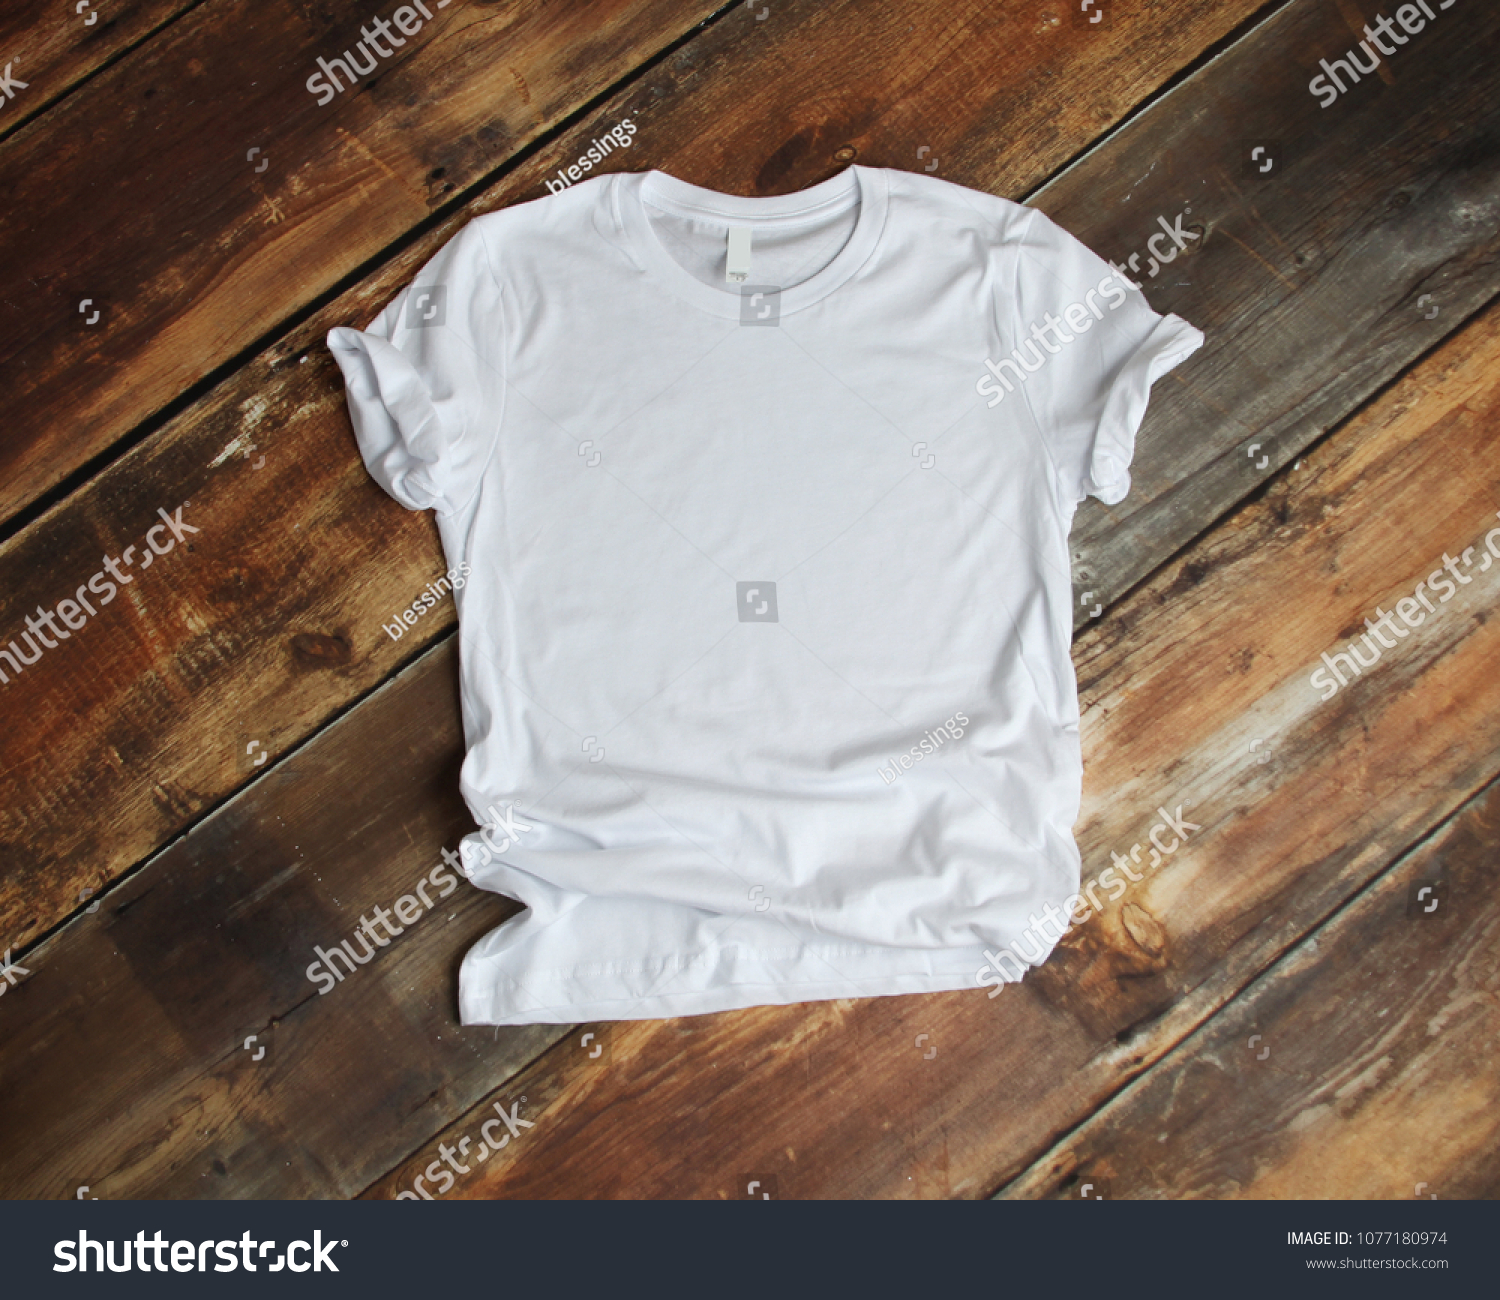 Woman's White T-Shirt Mockup JPG Download Rustic Girl Fashion Design Stock Photography on Hanger Mock Up Shirt on Wood Background